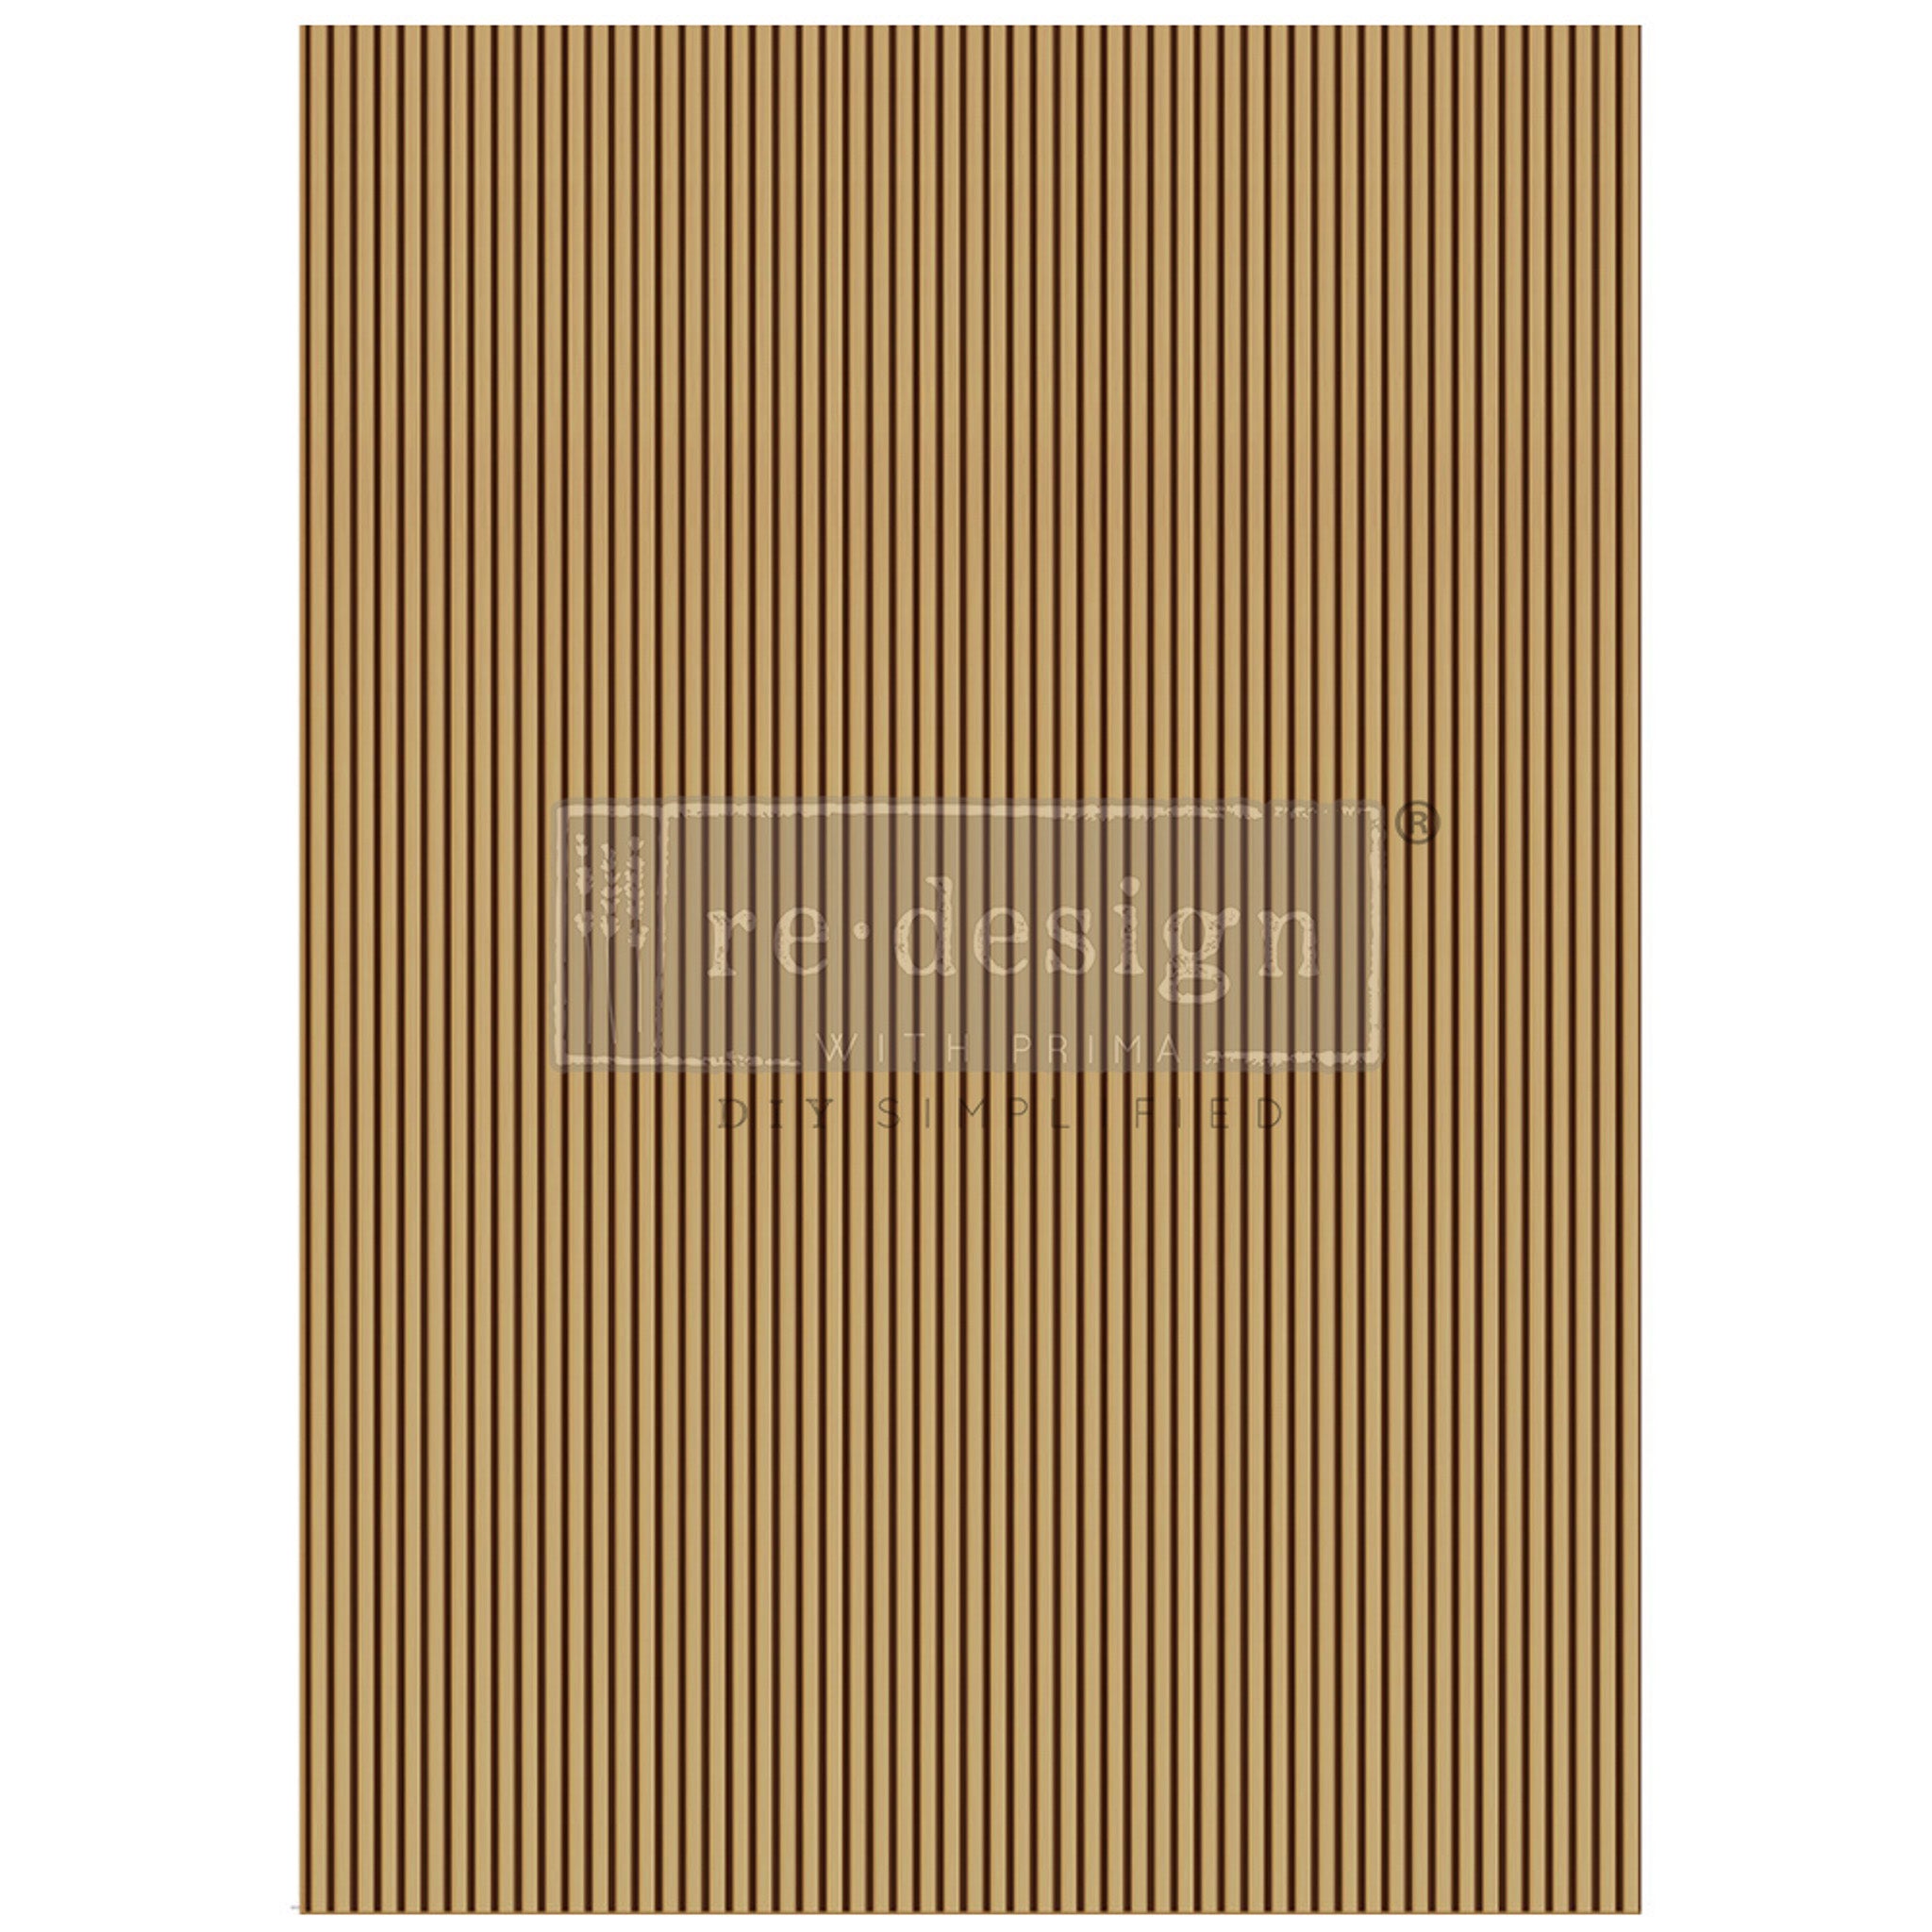 A1 fiber paper that features a repeating fine line design that resembles small slats of wood. White borders are on the sides.